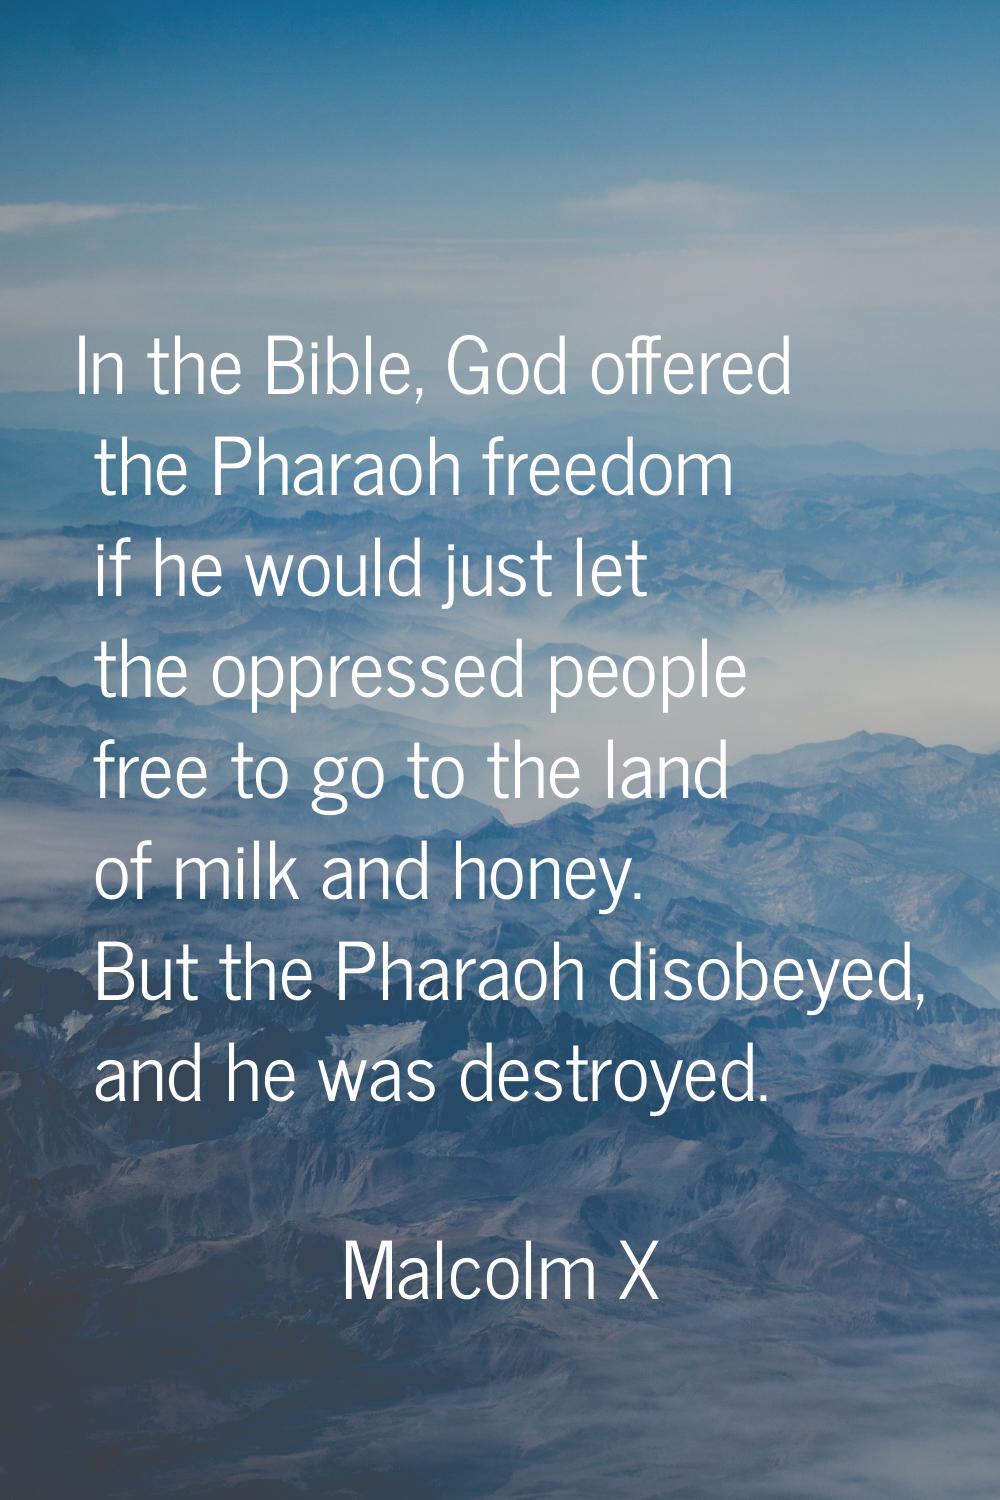 In the Bible, God offered the Pharaoh freedom if he would just let the oppressed people free to go 